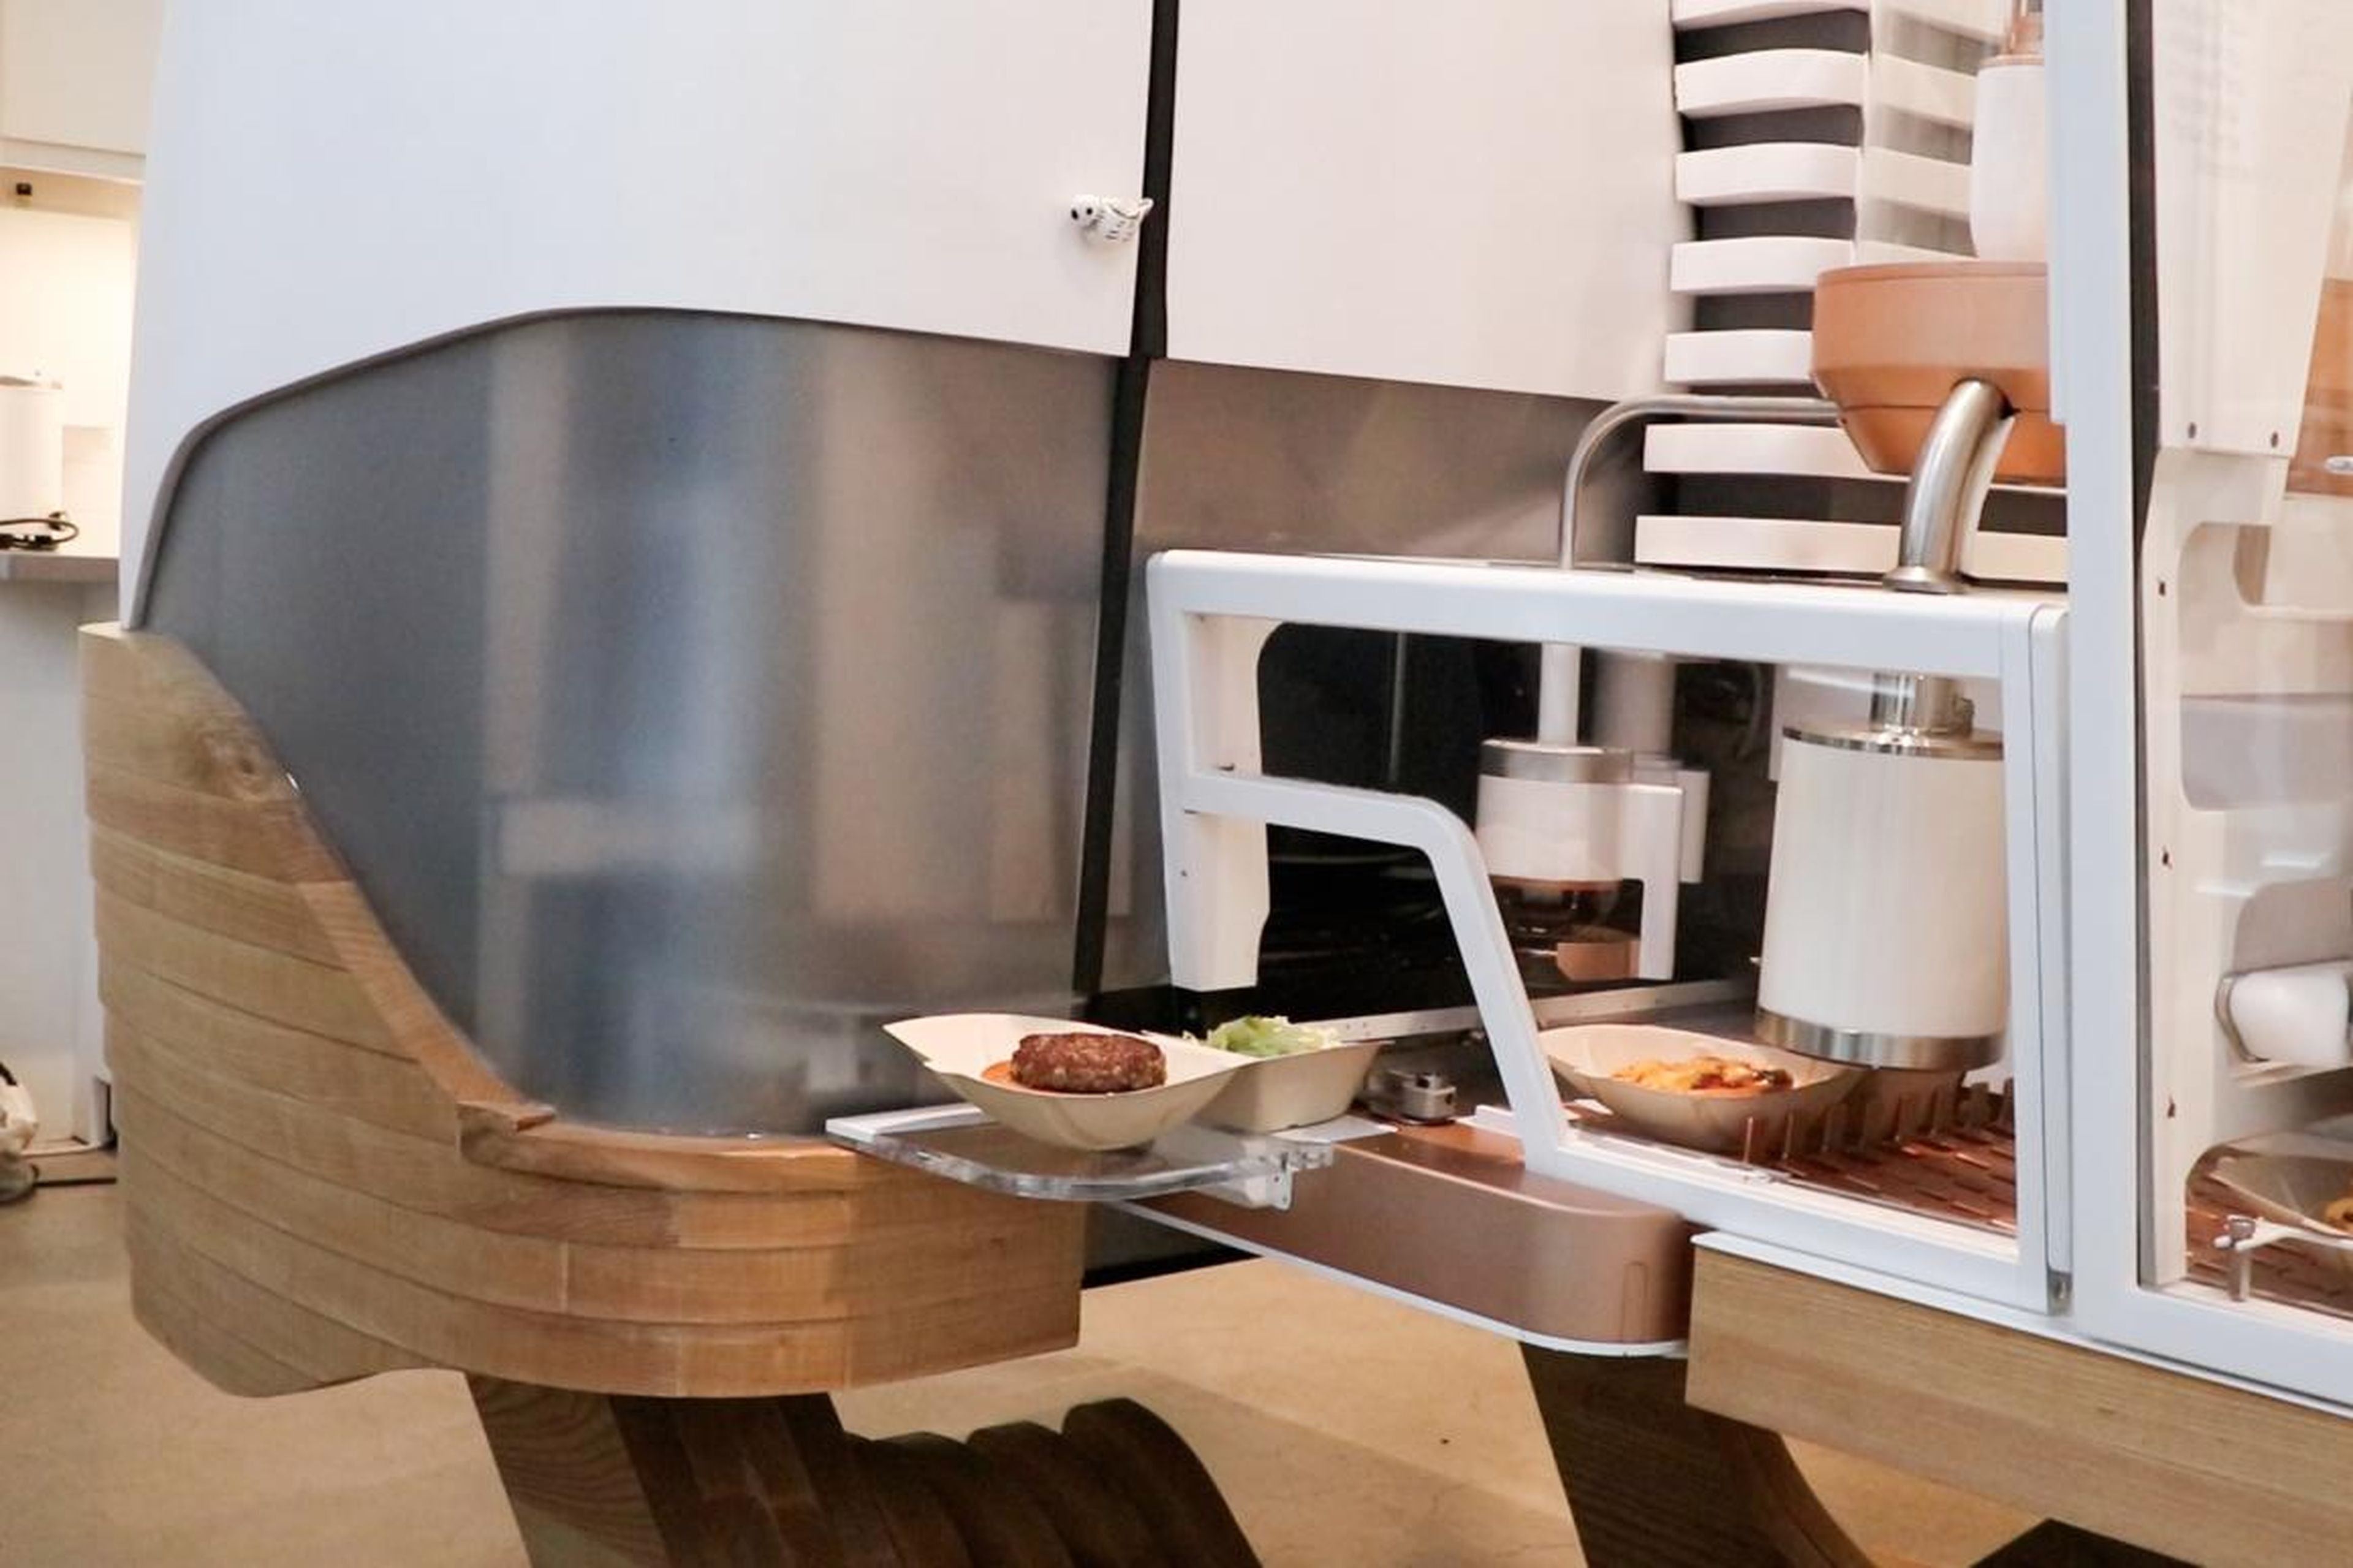 While the bun gets all the fixings, the robot grinds the meat to order. It takes place in this opaque case, so guests don't see the magic happen.